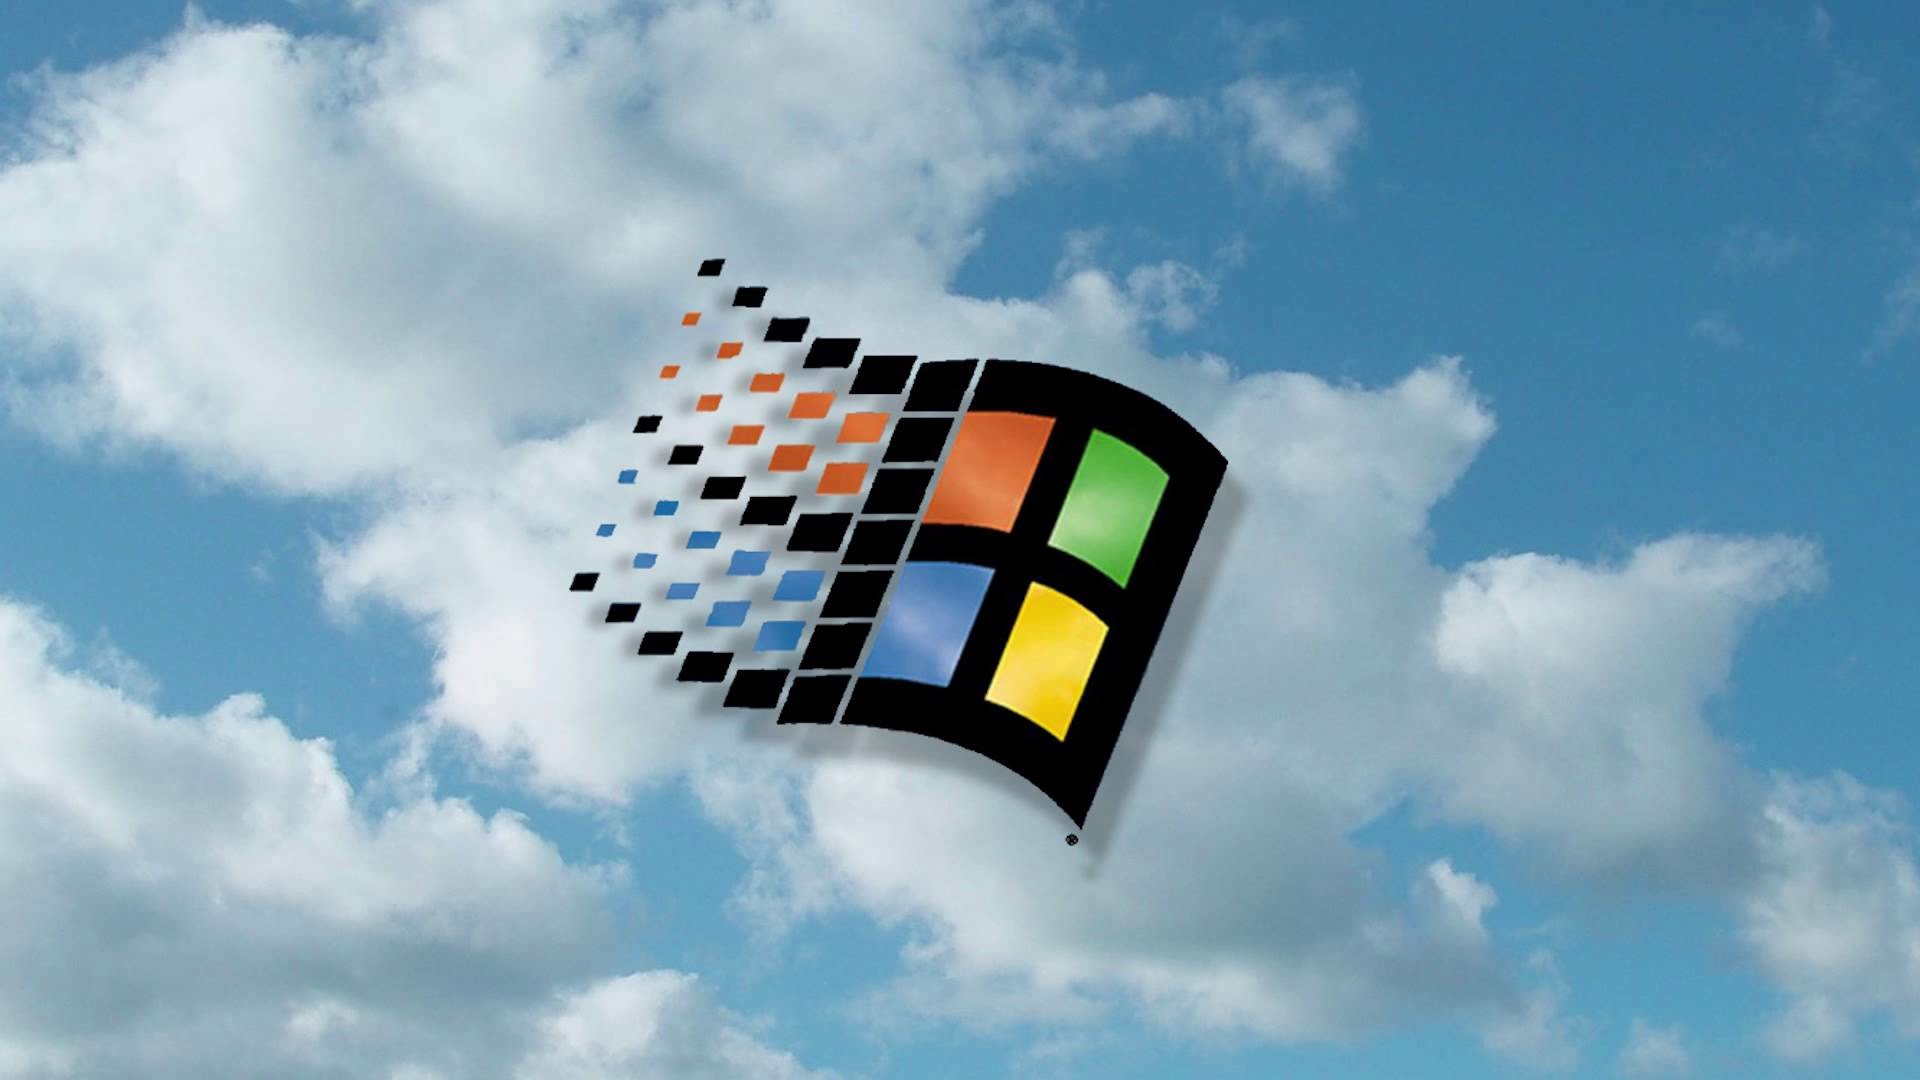 1920x1080 Windows 95 "Start Me Up" Commercial 1080p Restored